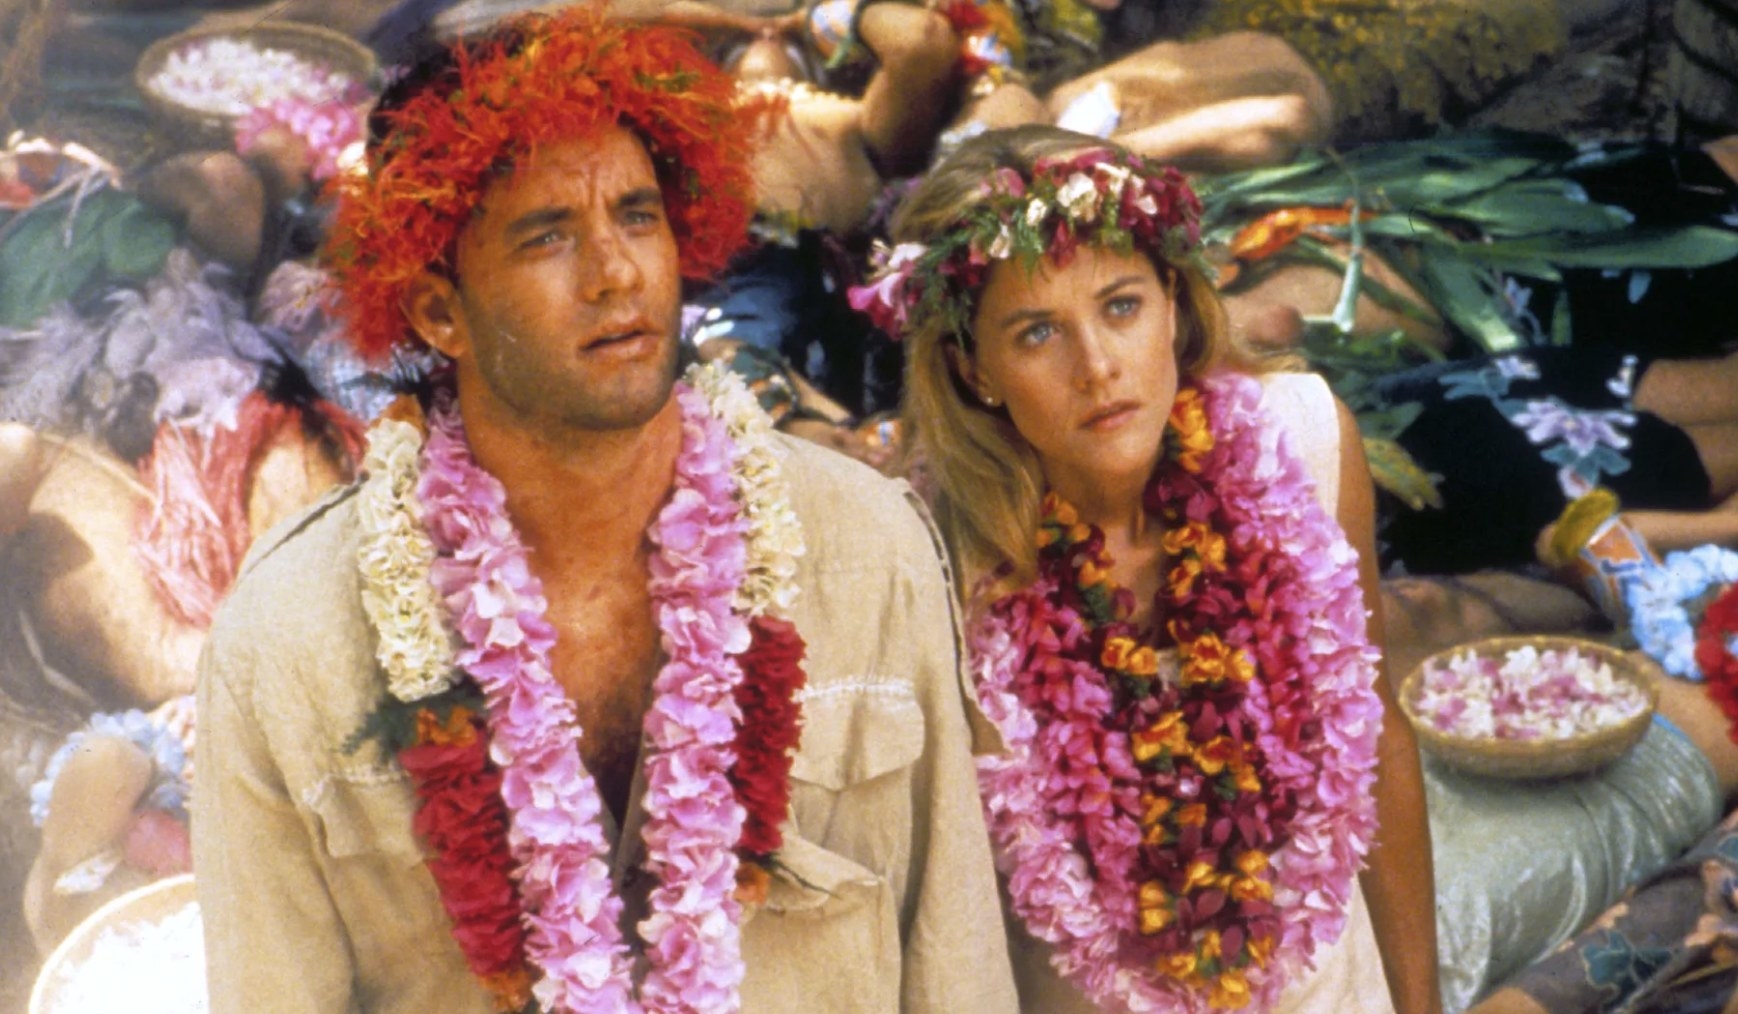 Actors Tom Hanks and Meg Ryan stand next to each other looking dumbfounded. They wear necklace and crowns made of tropical flowers.